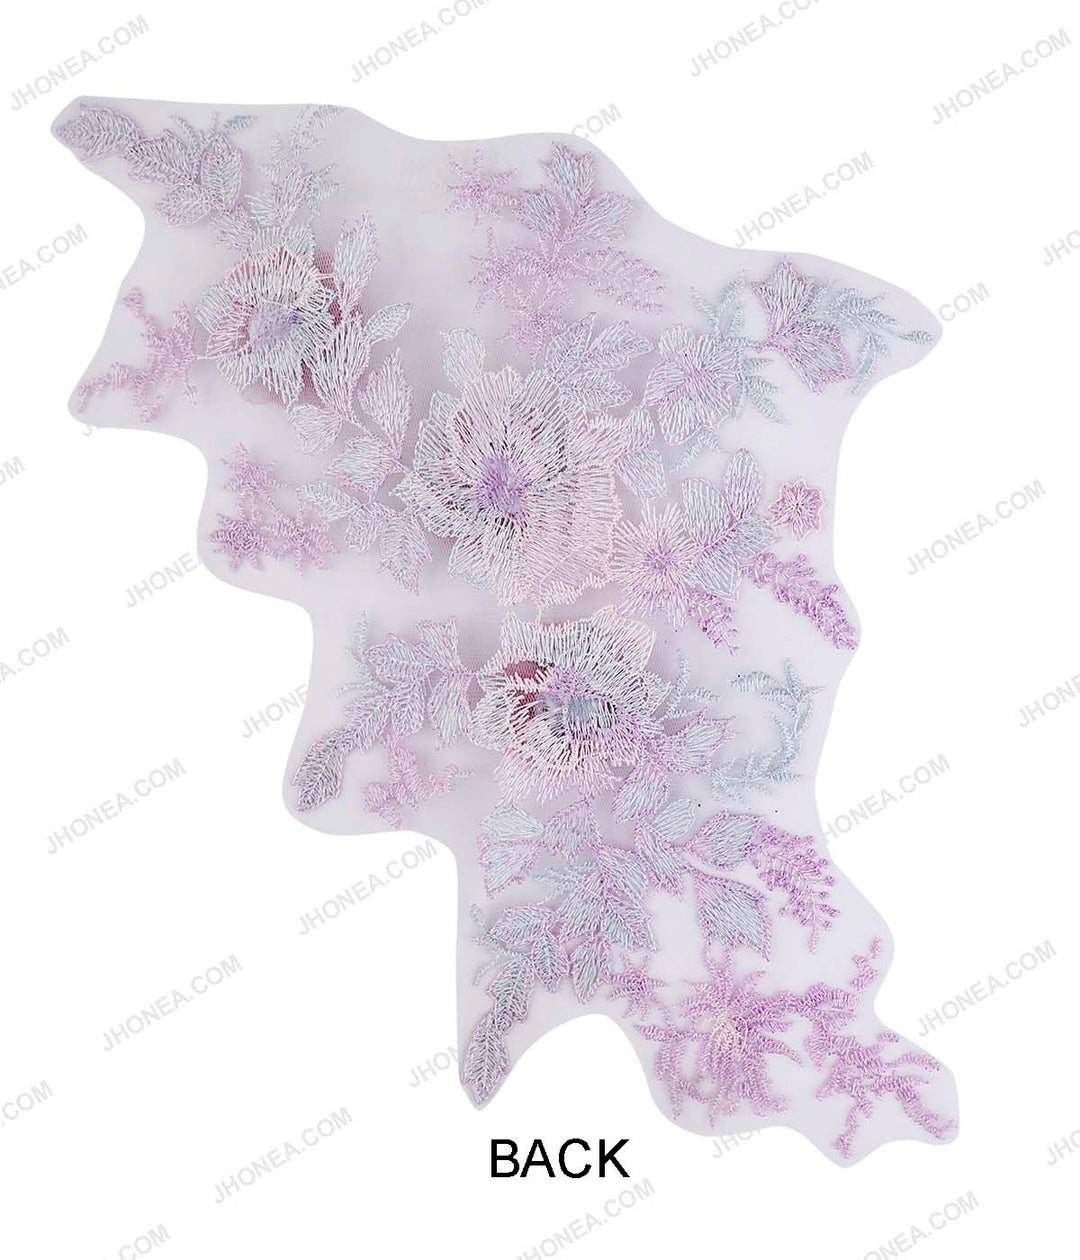 Pastel Purple with Onion Pink Net Flower Embroidery Patch